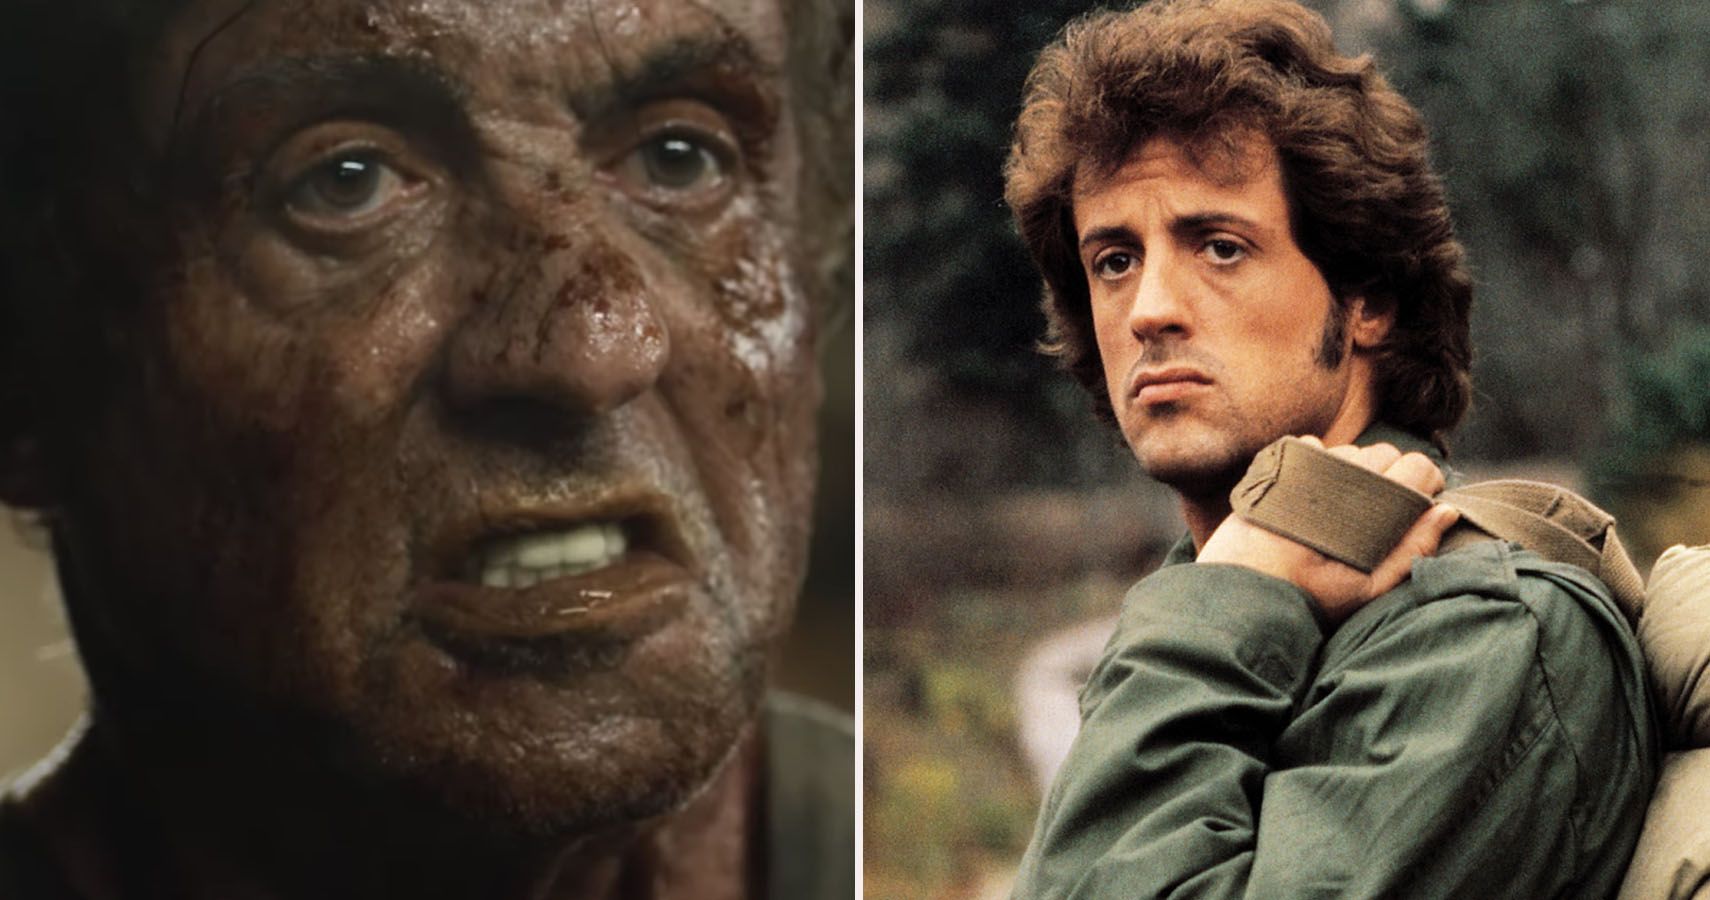 They Drew First Blood Best BehindTheScenes Facts About The Rambo Movies